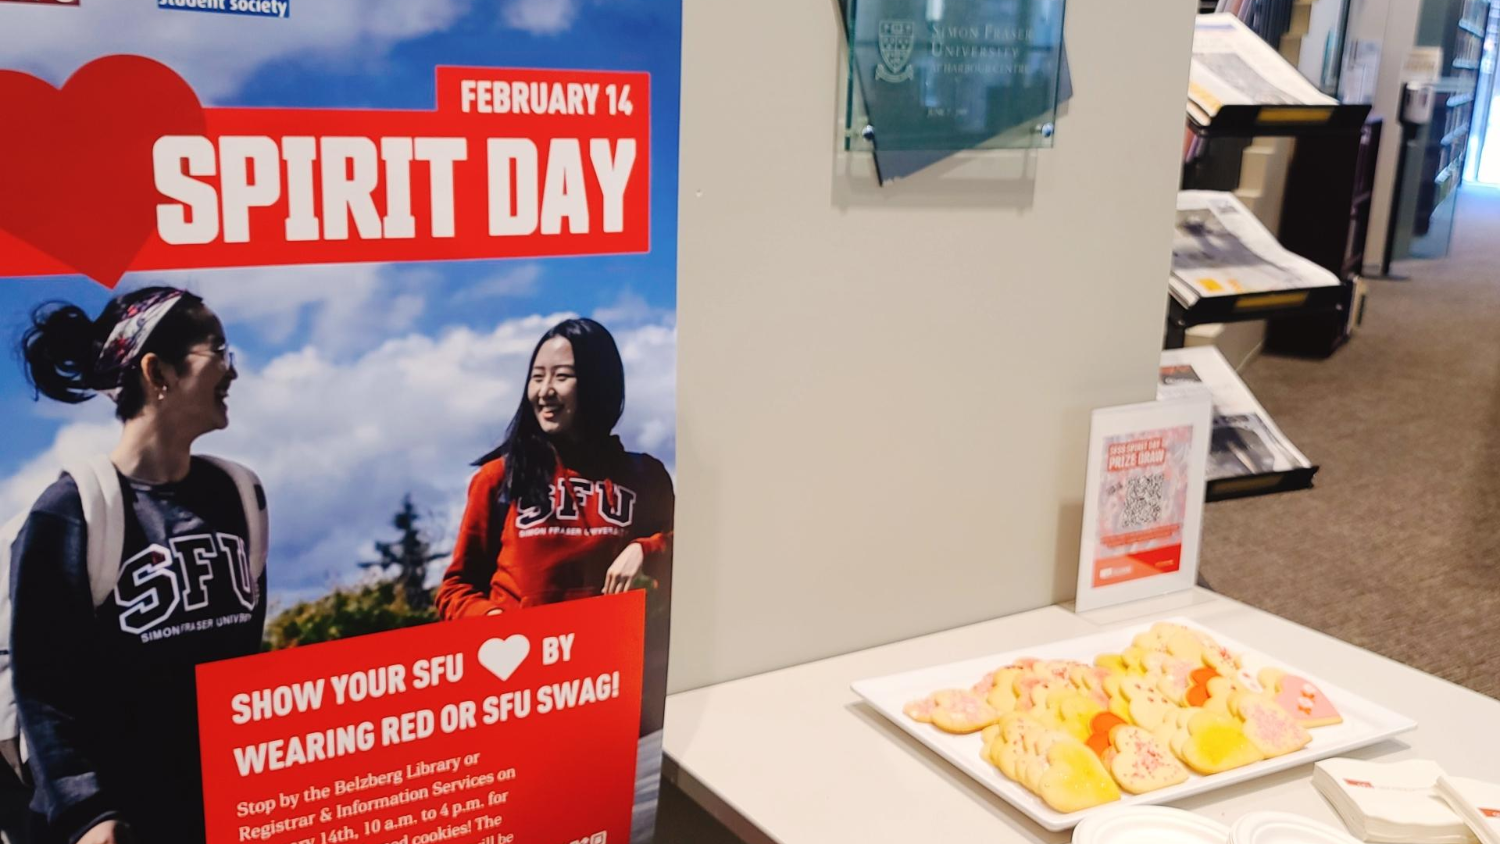 SFU Spirit Day poster and heart-shaped cookies set up on a table in the Belzberg Library